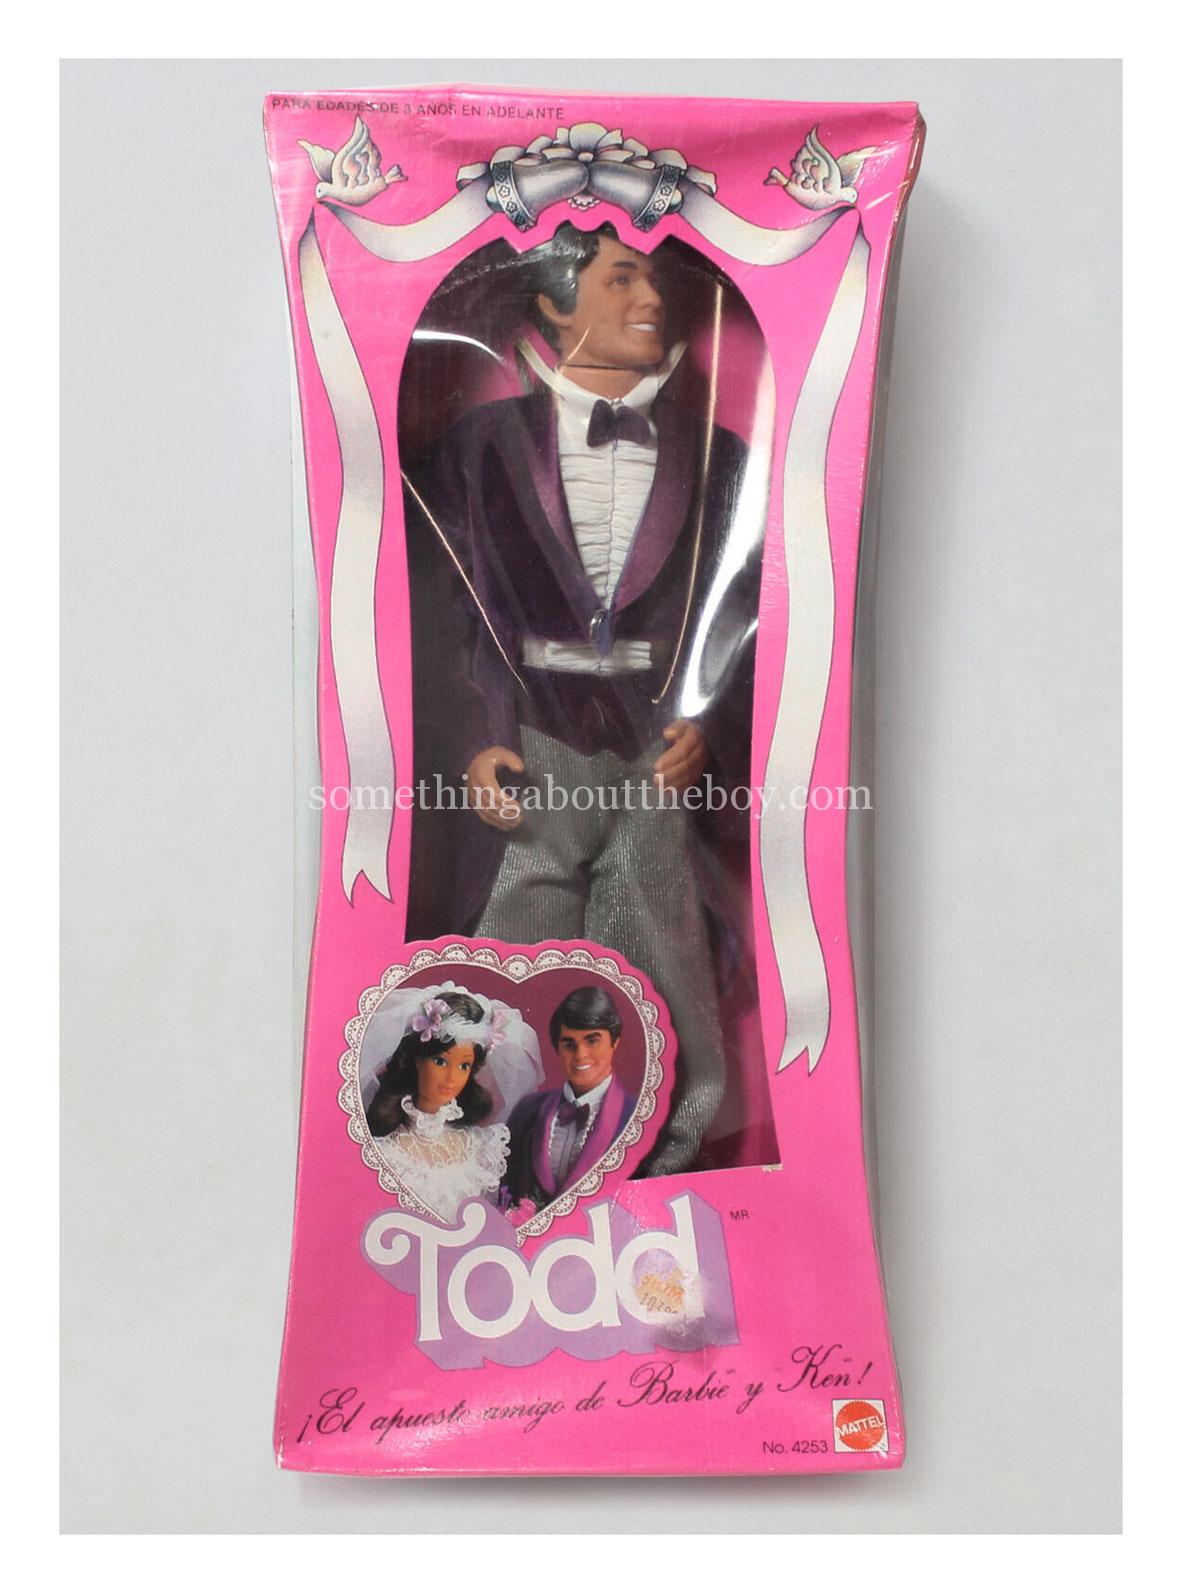 1983 #4253 Todd (Mexican version) in original packaging